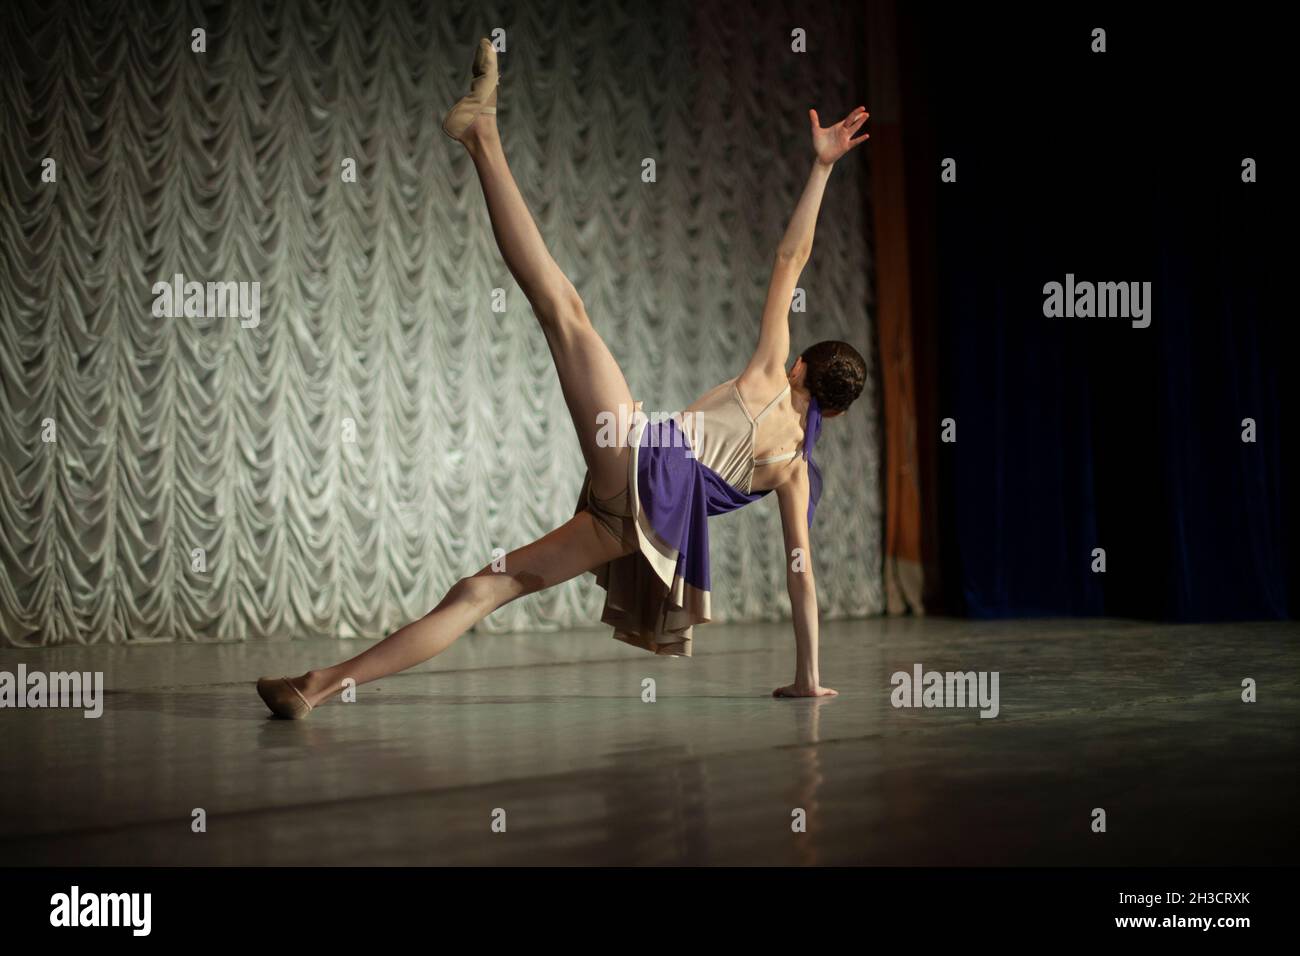 Dancer on stage. A girl in a purple dress. Dance lesson. Stock Photo